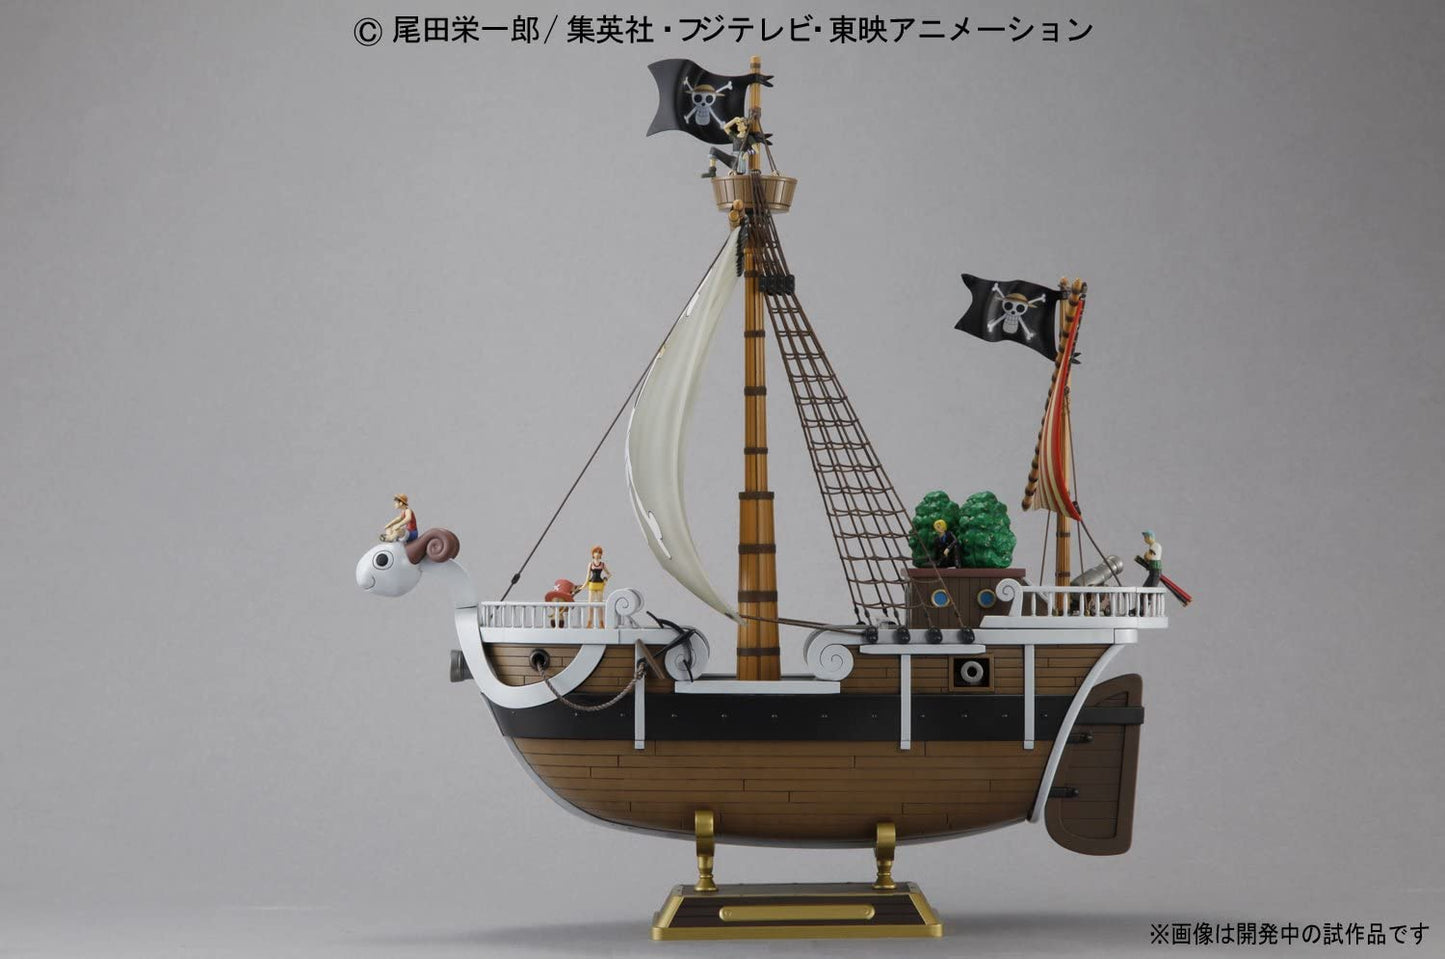 One Piece - Going Merry